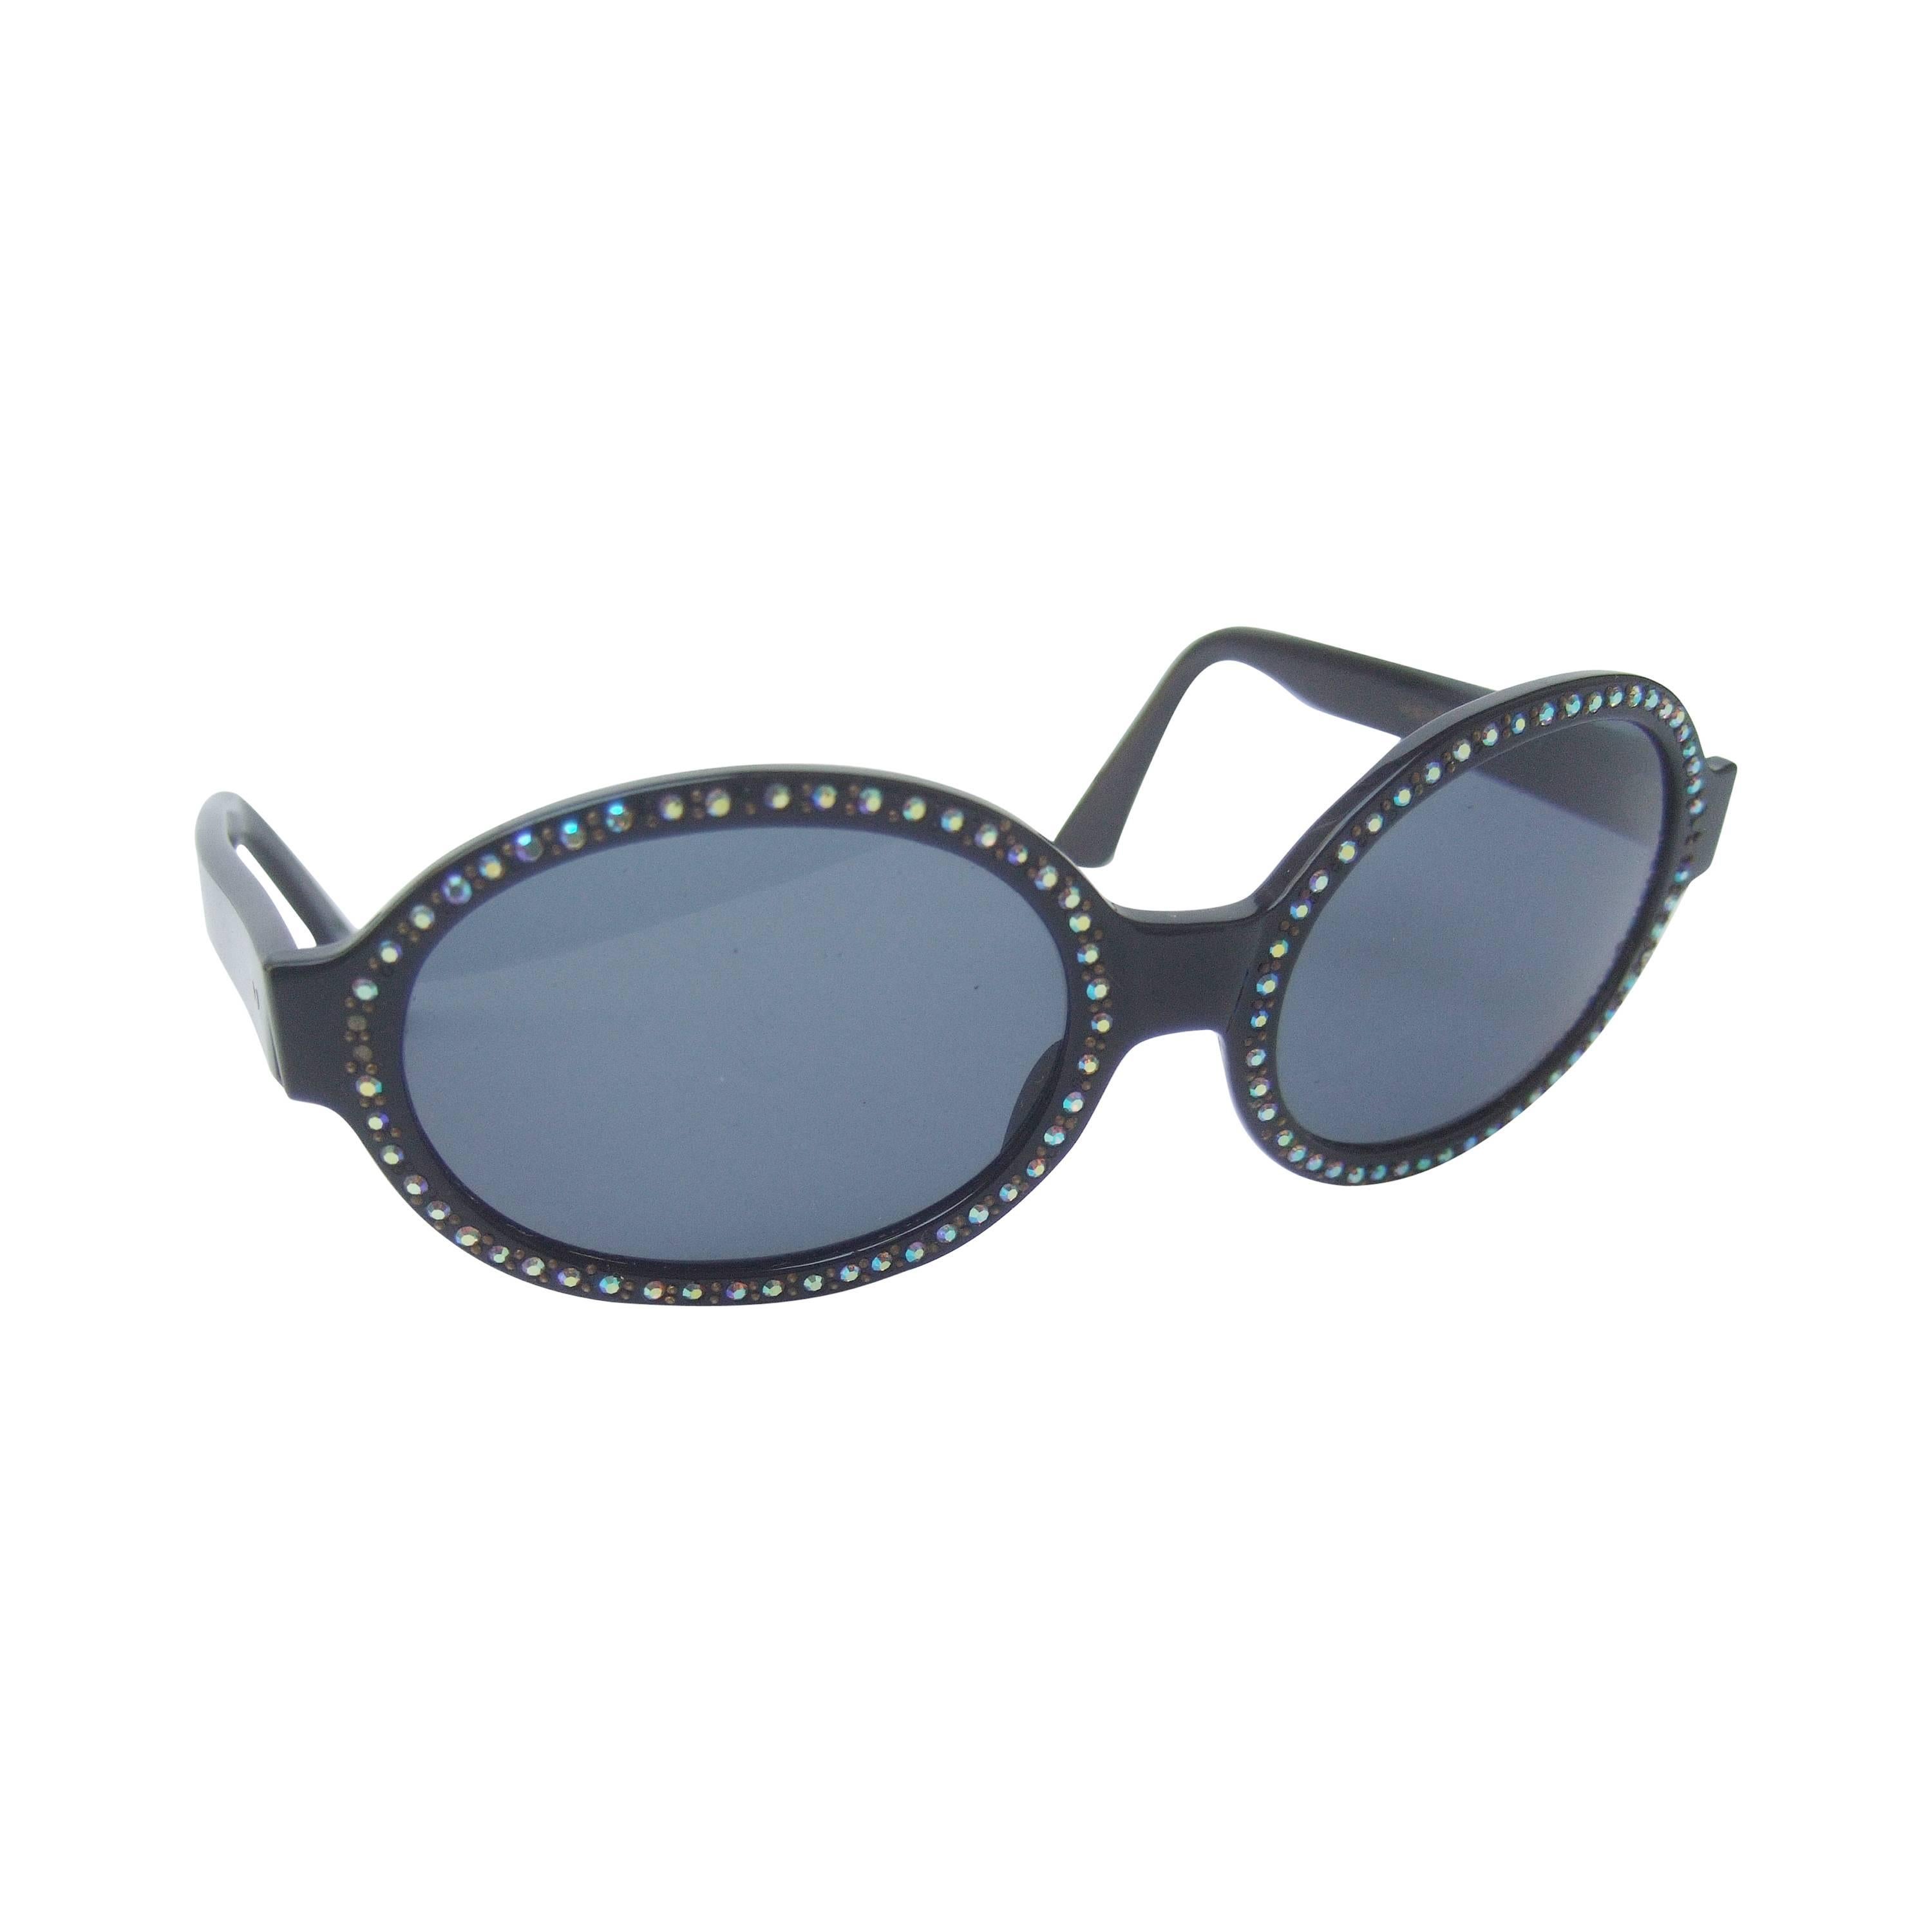 Chic Black Crystal Trim Tinted Sunglasses Made in France c 1970